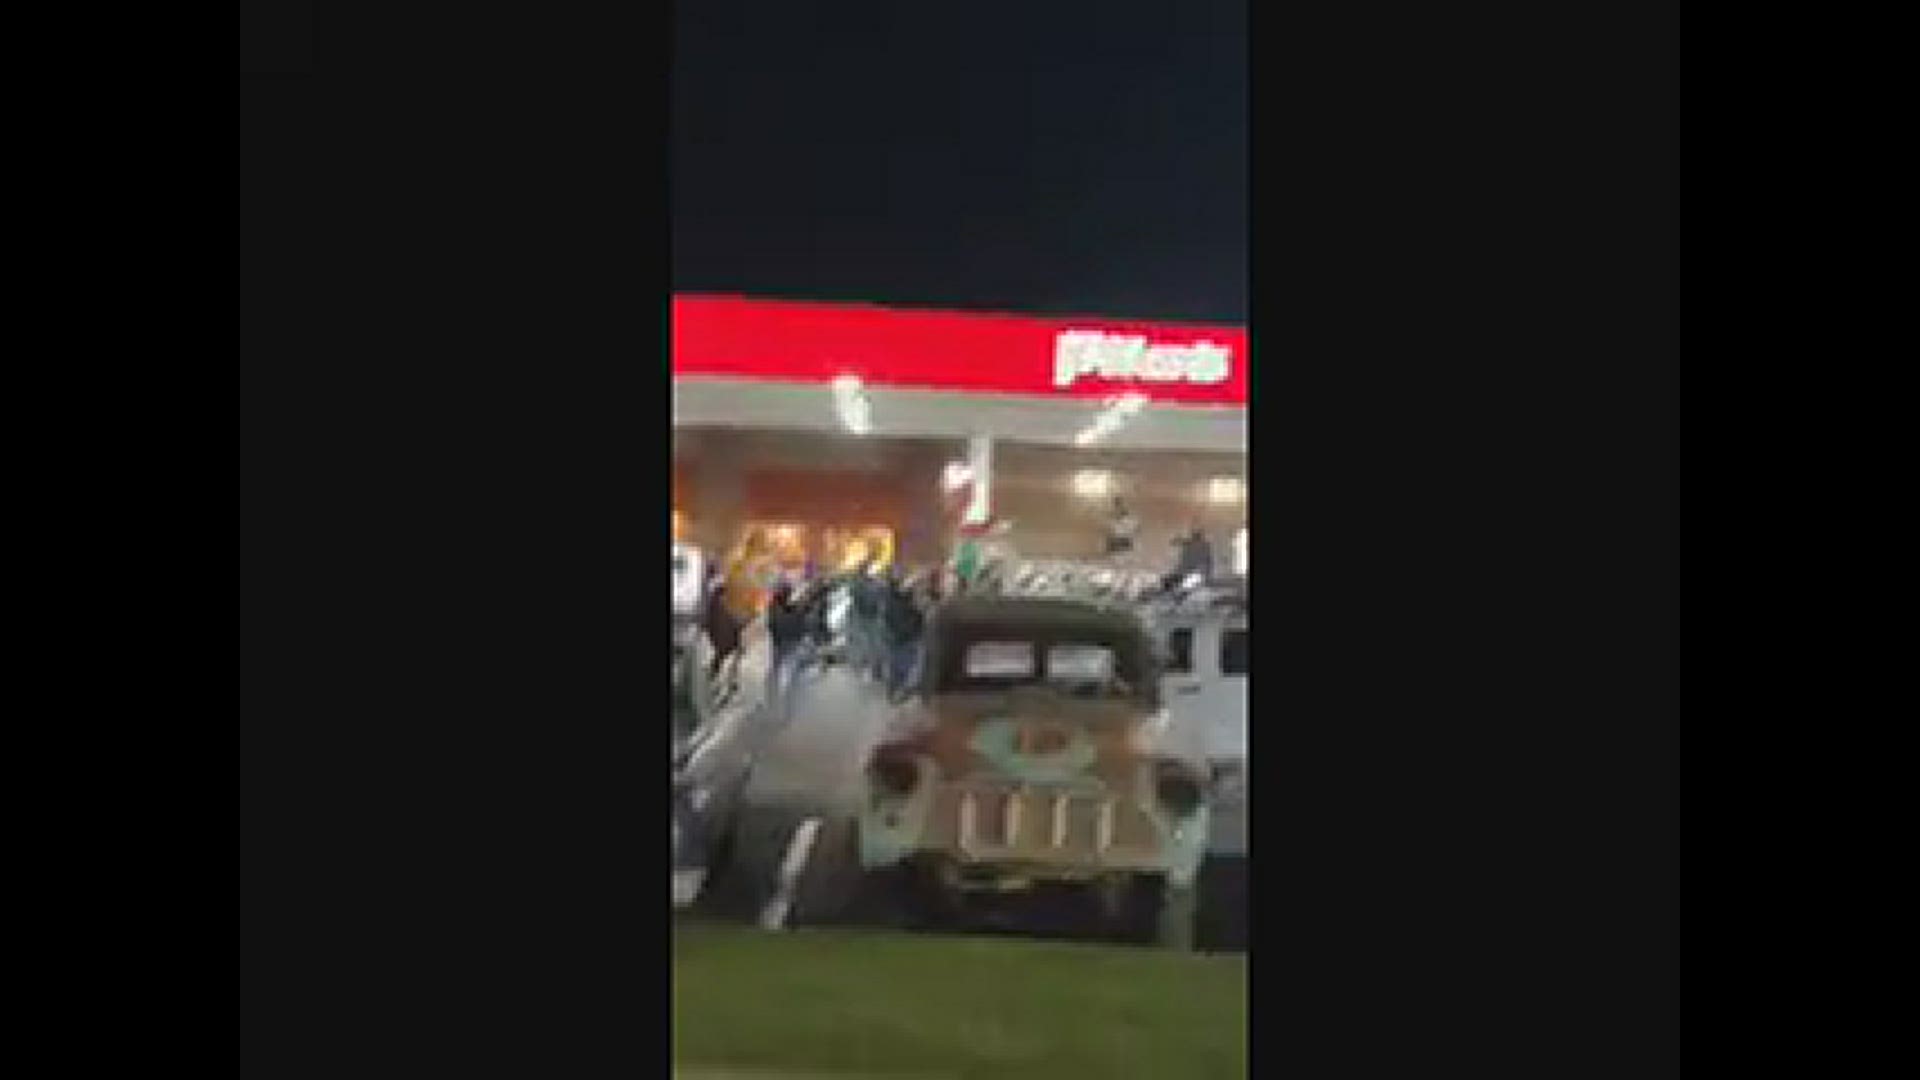 Police said they were investigating after someone fired a handgun twice into the air during an altercation at a Pilot gas station in Pigeon Forge.
Credit: Submitted